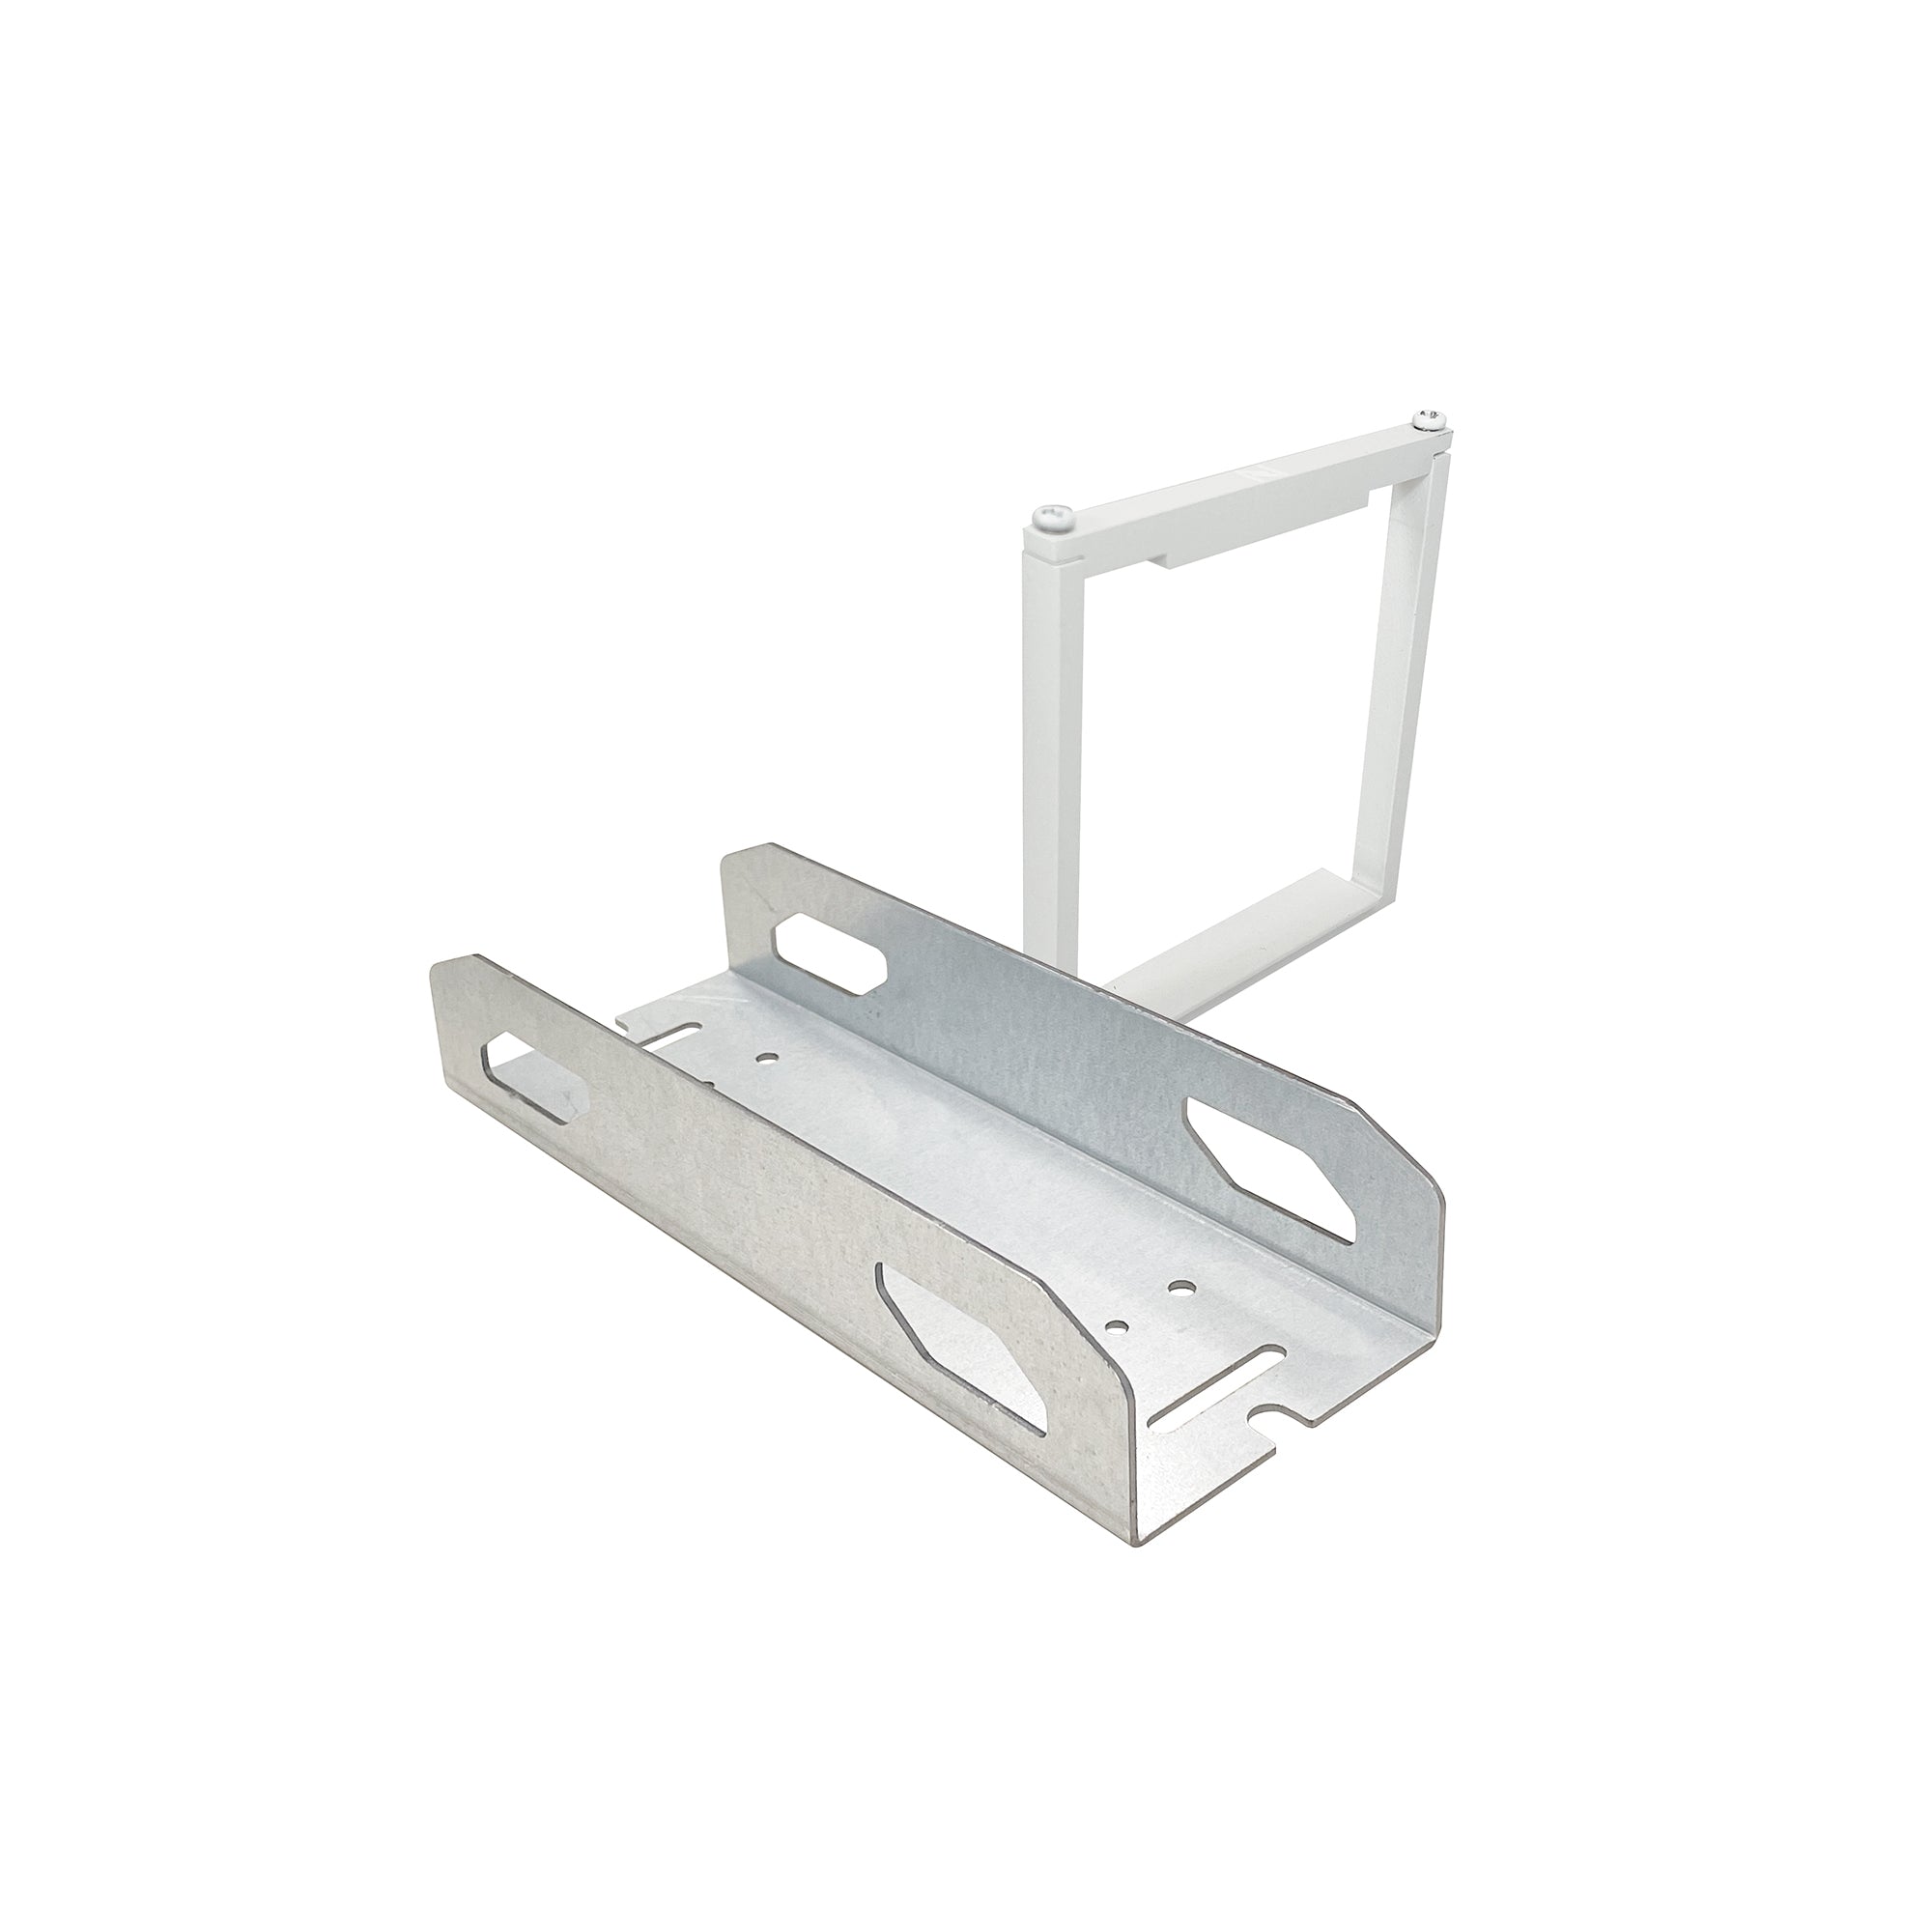 Nora Lighting NLUD-PMCW - Linear - Daisy Chain Bracket for NLUD (pendant mount), White Finish